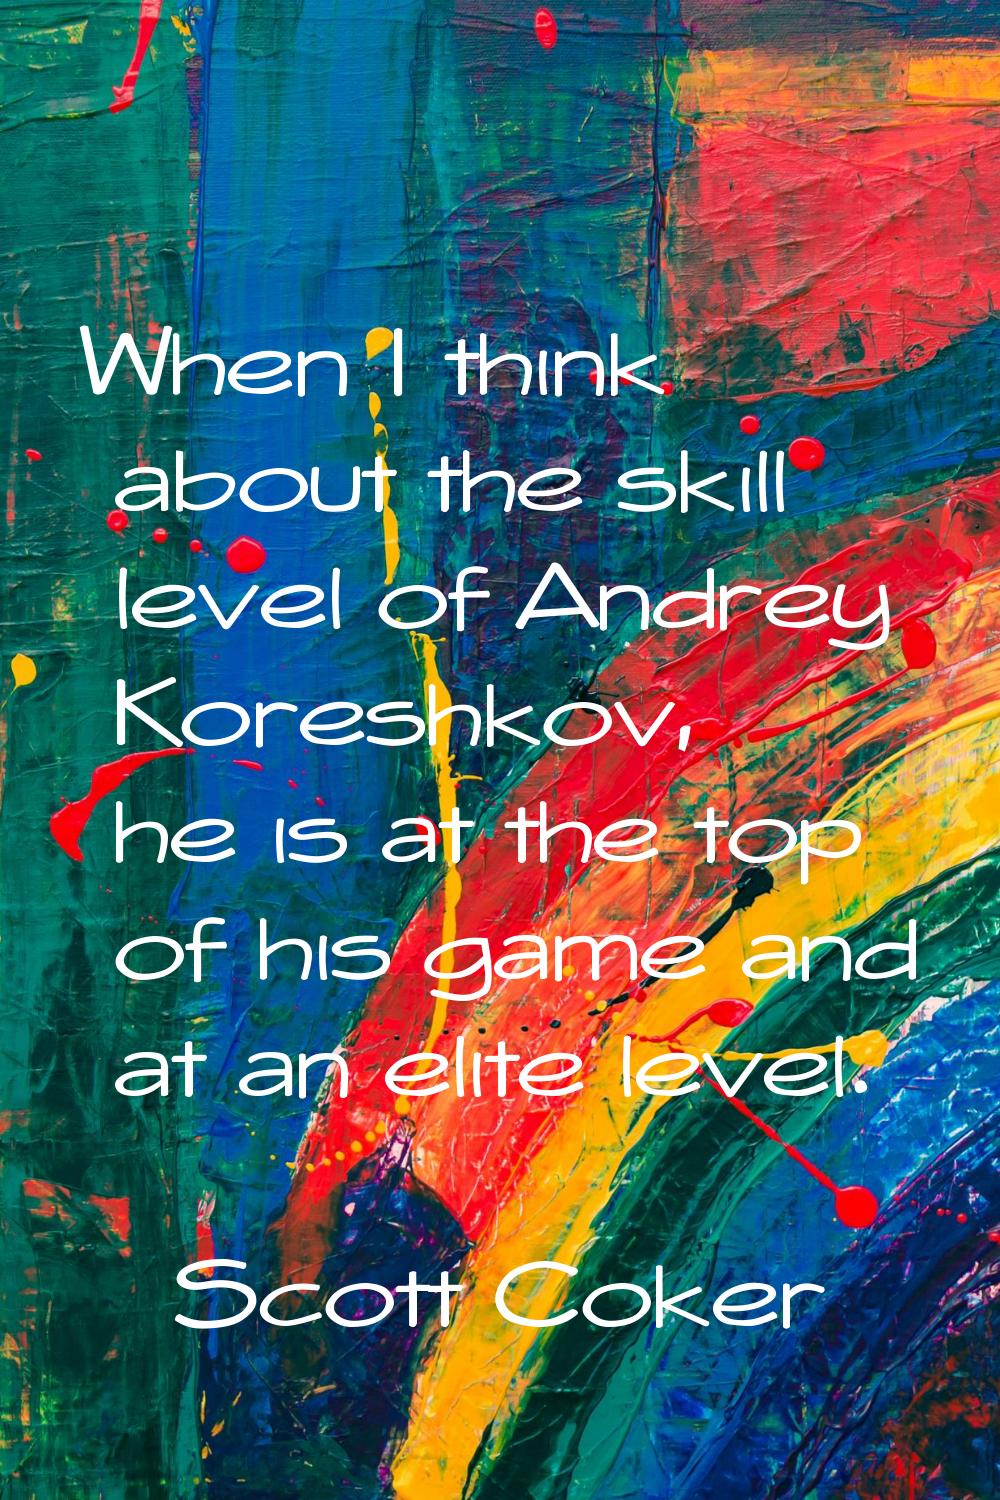 When I think about the skill level of Andrey Koreshkov, he is at the top of his game and at an elit